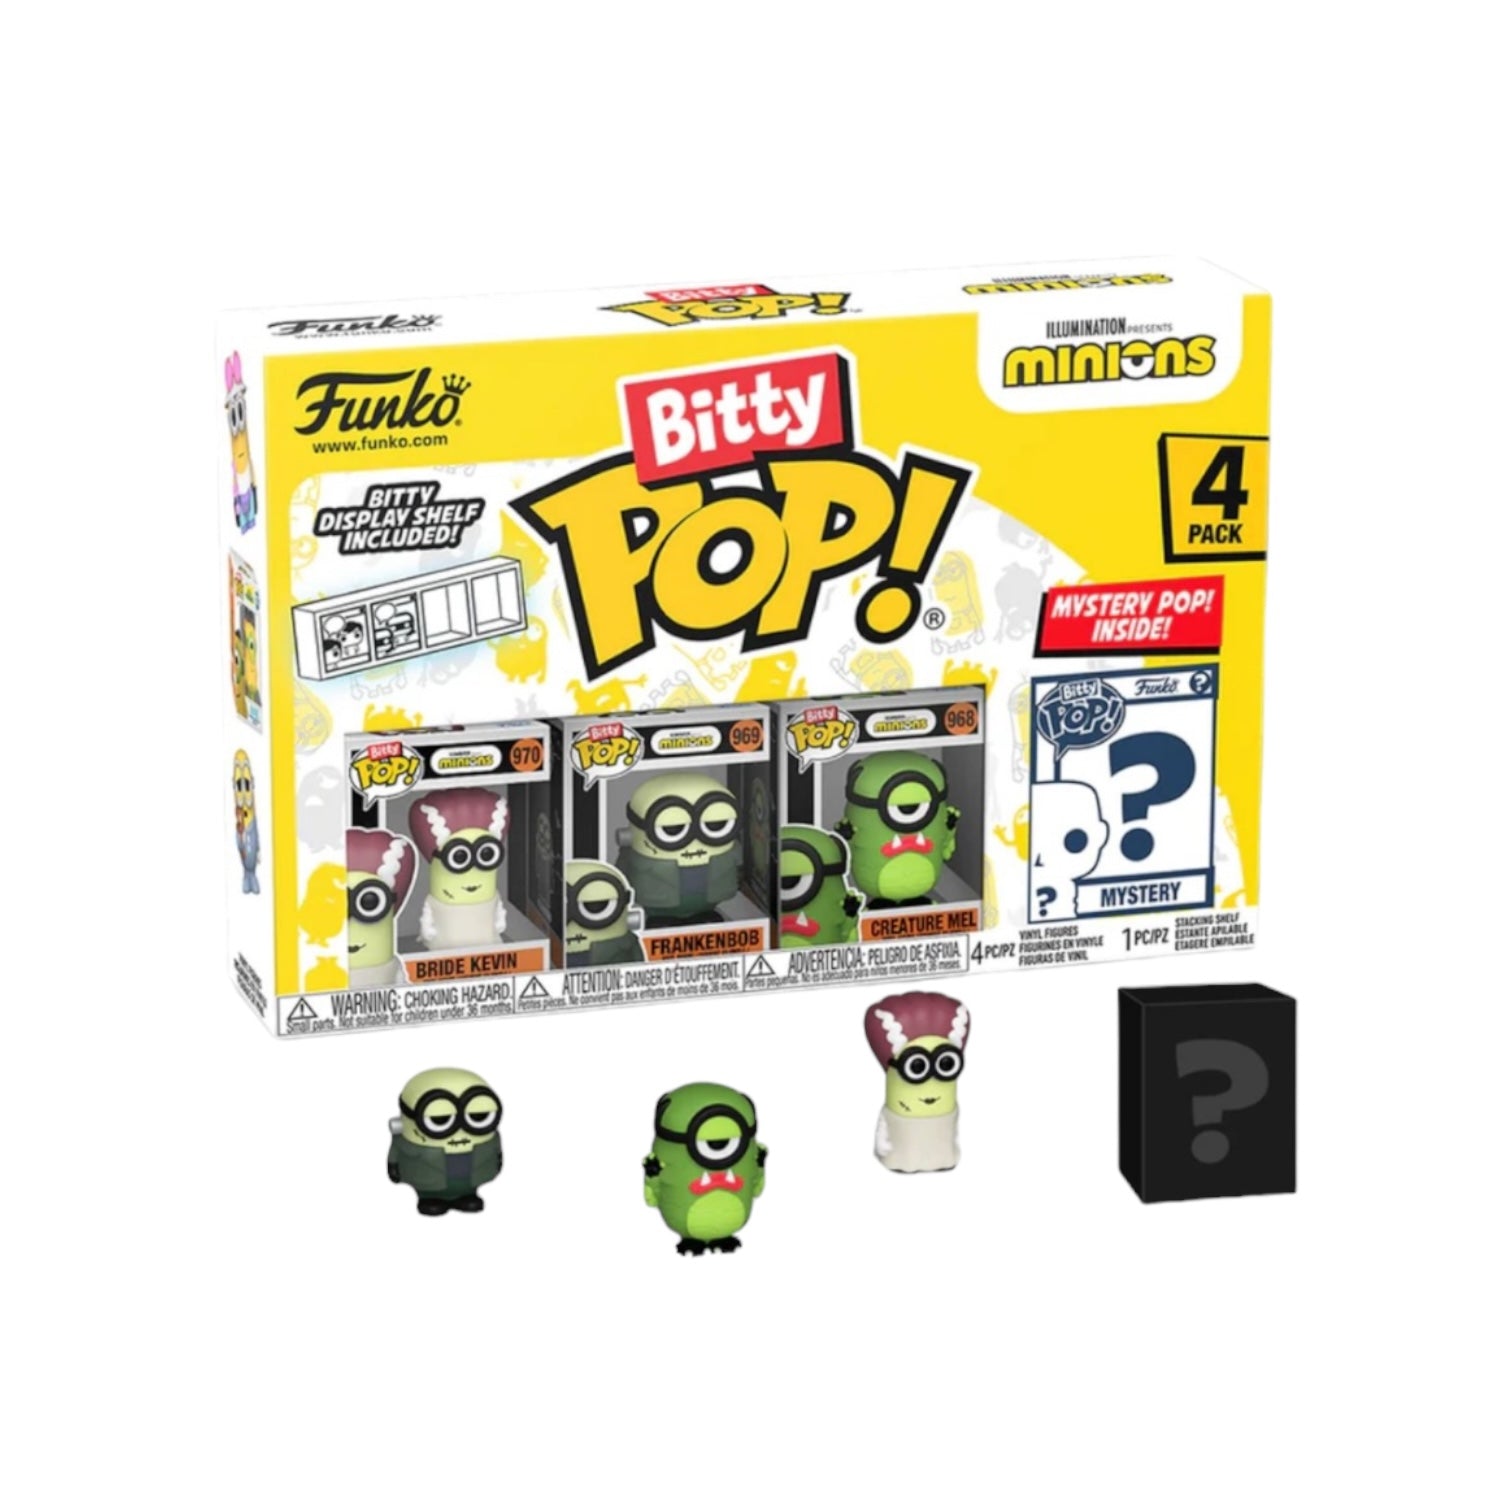 Frankenbob 4 Pack Bitty Funko POP! - Minions - Chance Of Chase - PREORDER